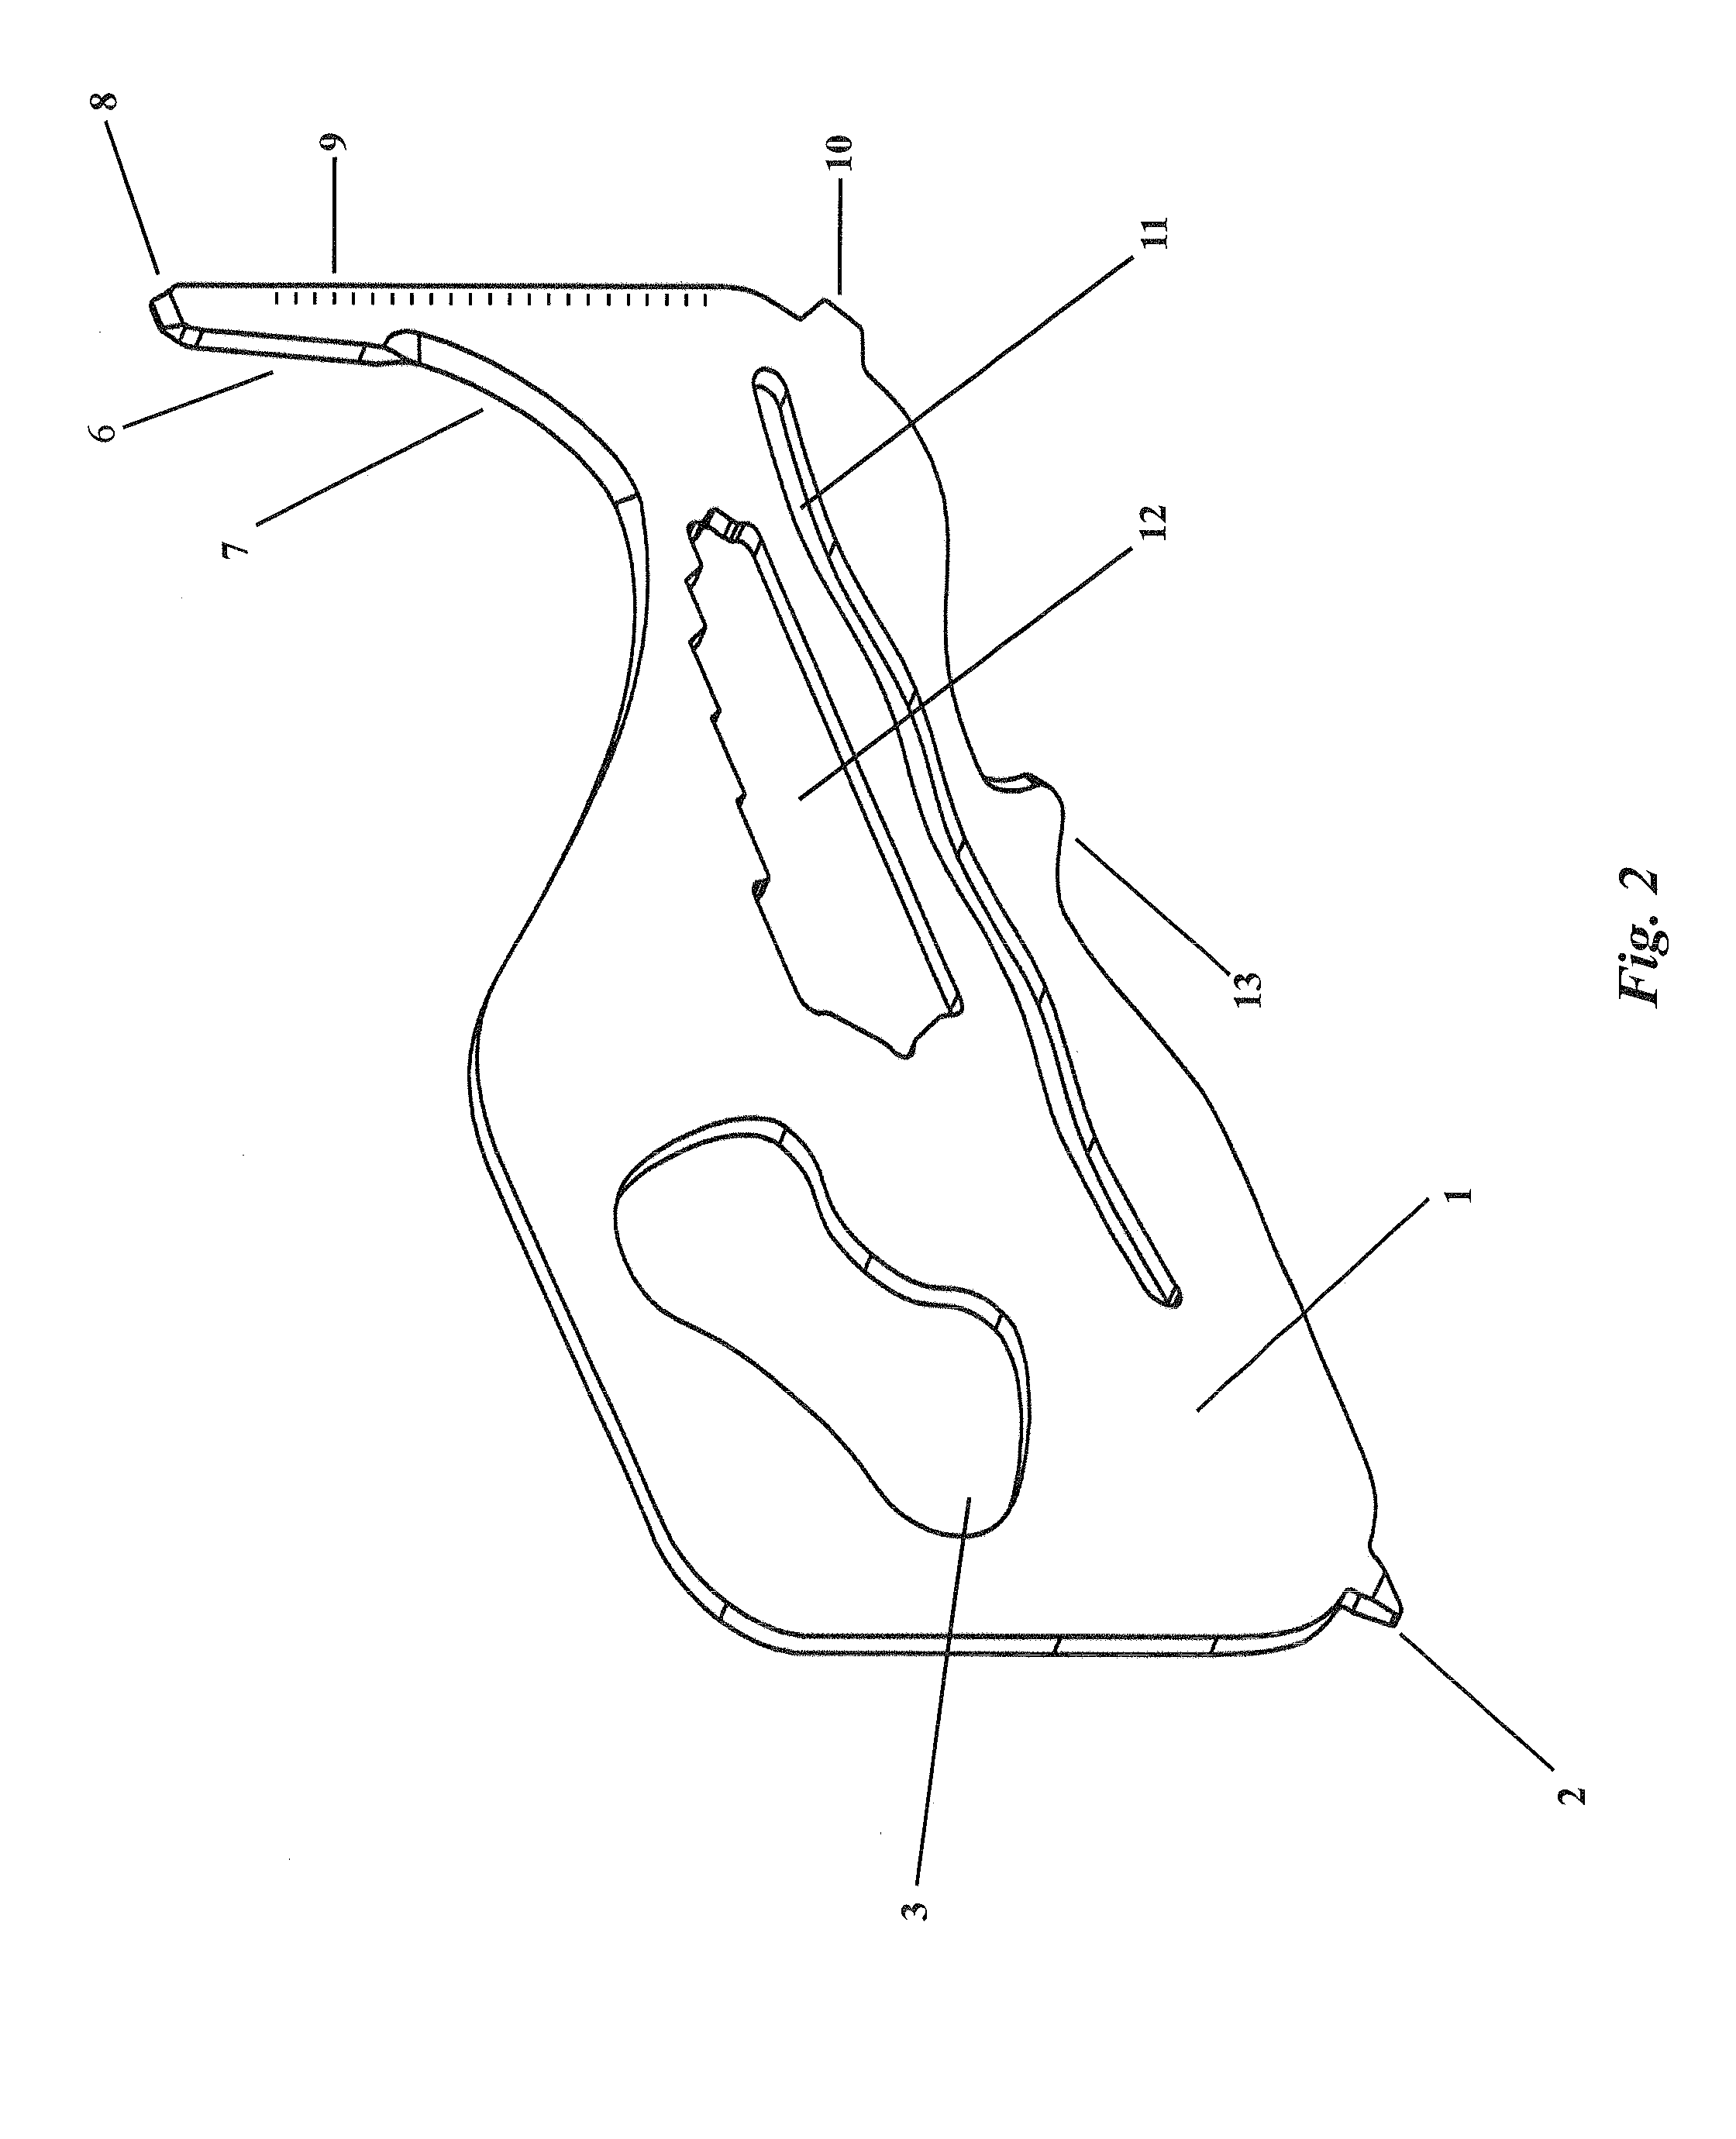 Utility tool device and related methods and systems